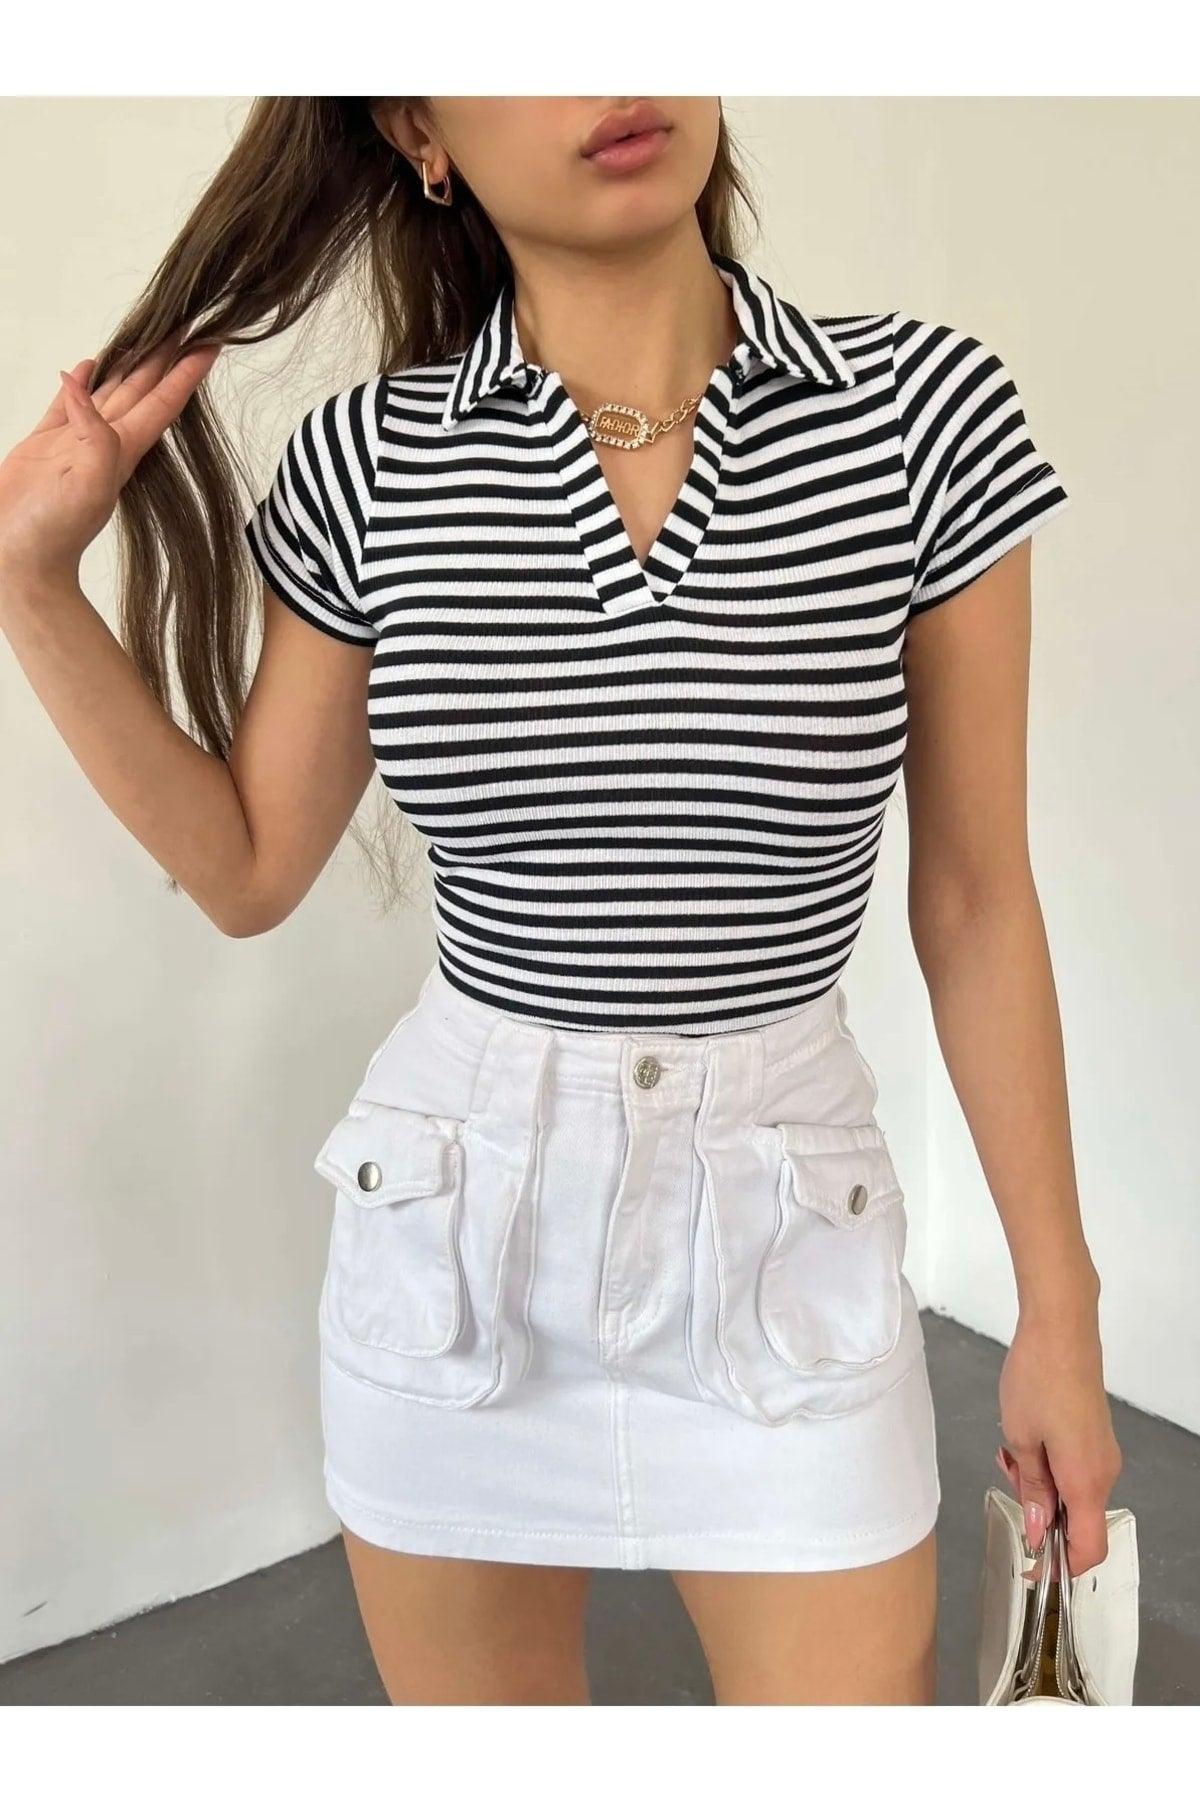 Fitted/fitting Polo Neck Short Sleeve Striped Camisole Crop Blouse Black White - Swordslife